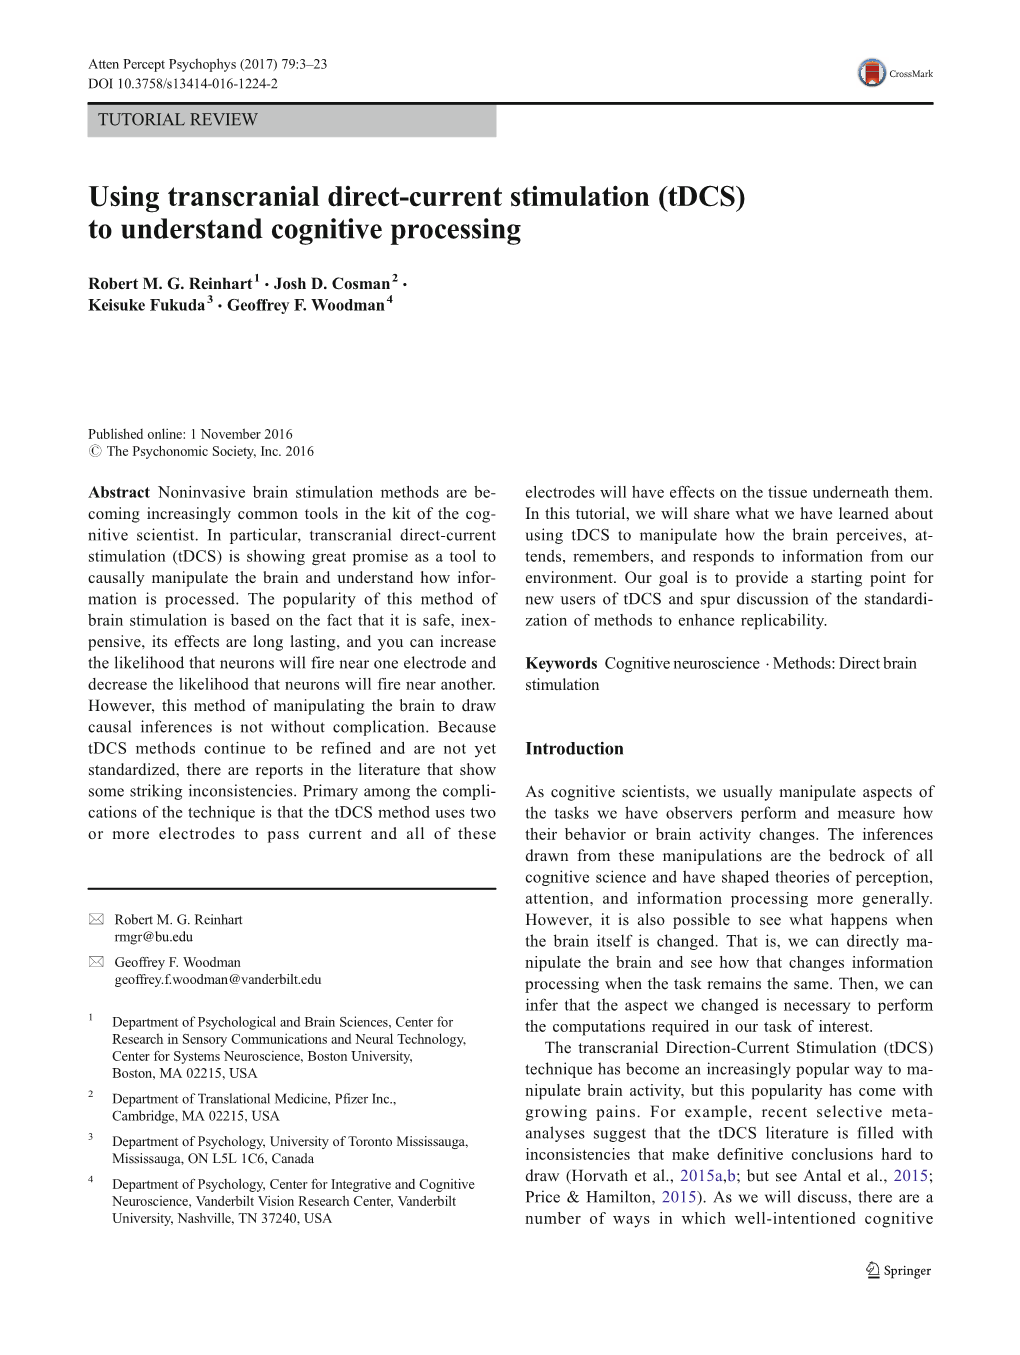 Using Transcranial Direct-Current Stimulation (Tdcs) to Understand Cognitive Processing